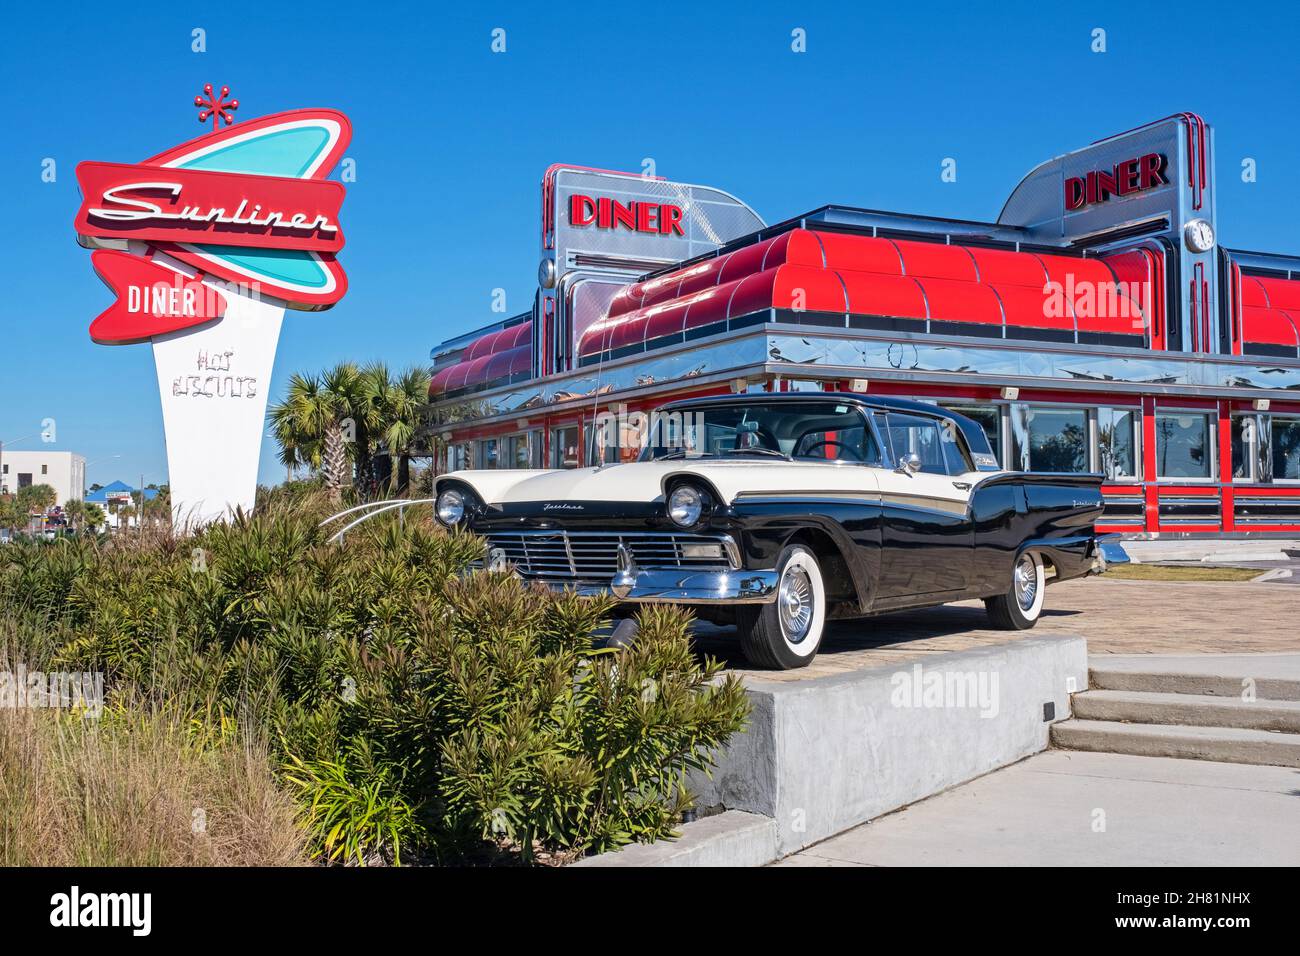 1957 Ford Fairlane 500 Skyliner at Sunliner Diner, 50s Themed Diner Restaurant in Gulf Shores, resort city in Baldwin County, Alabama, United States Stock Photo